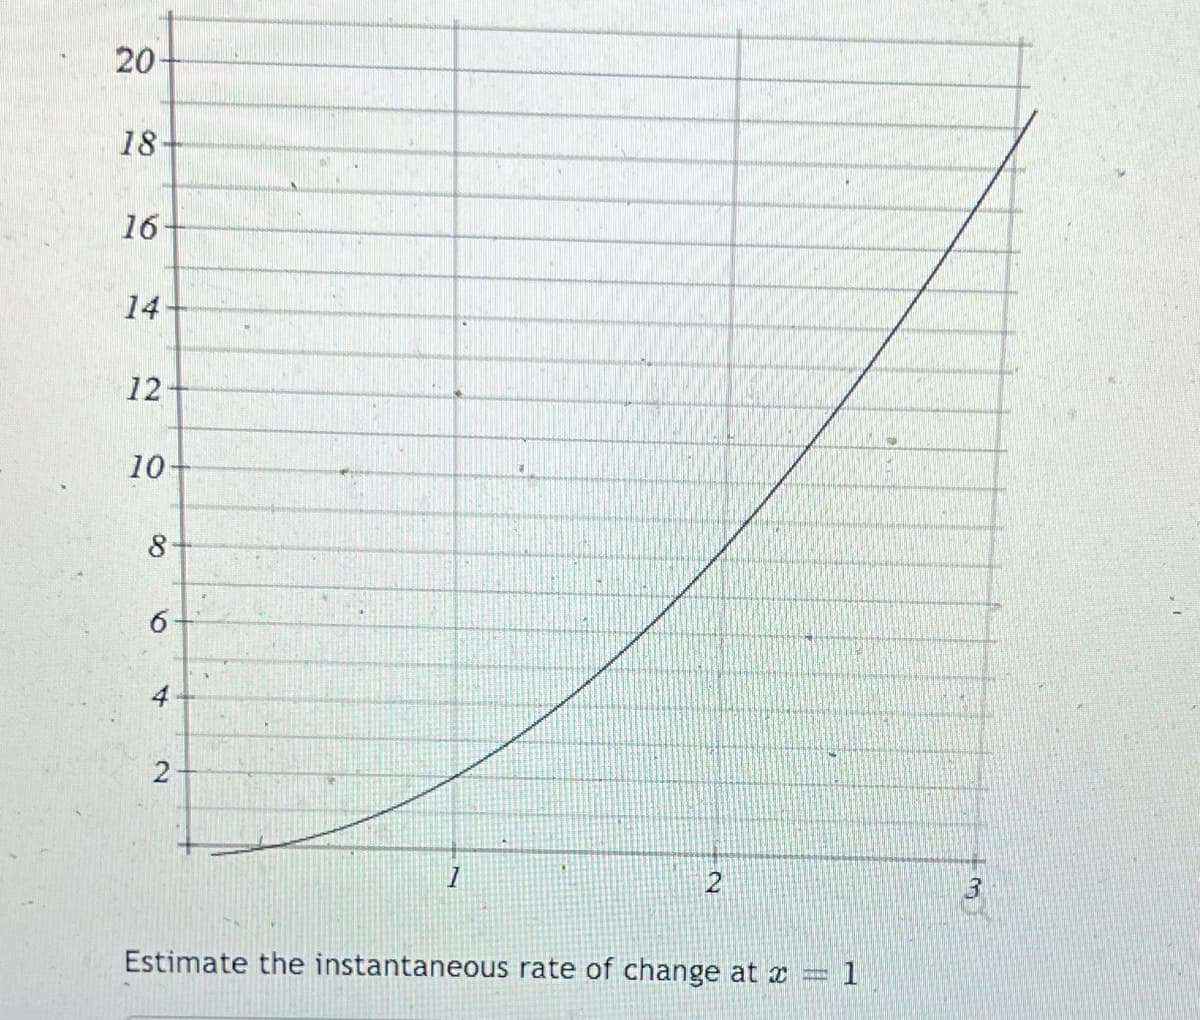 20-
18
16-
12-
10-
8-
Co
6-
4
2
1
2
Estimate the instantaneous rate of change at x = 1